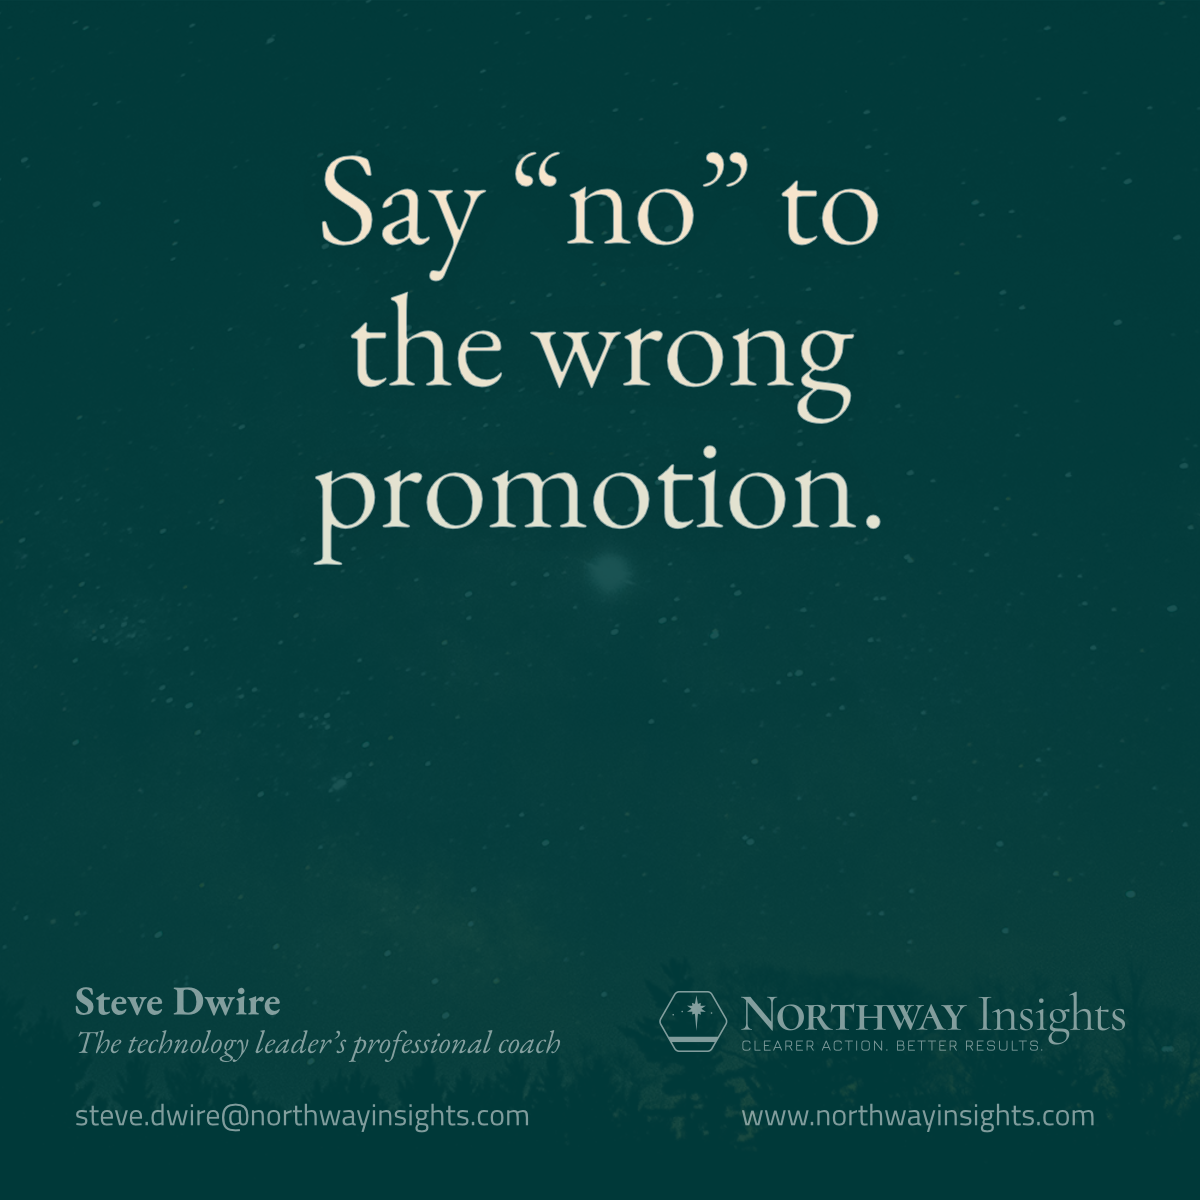 Say "no" to the wrong promotion.